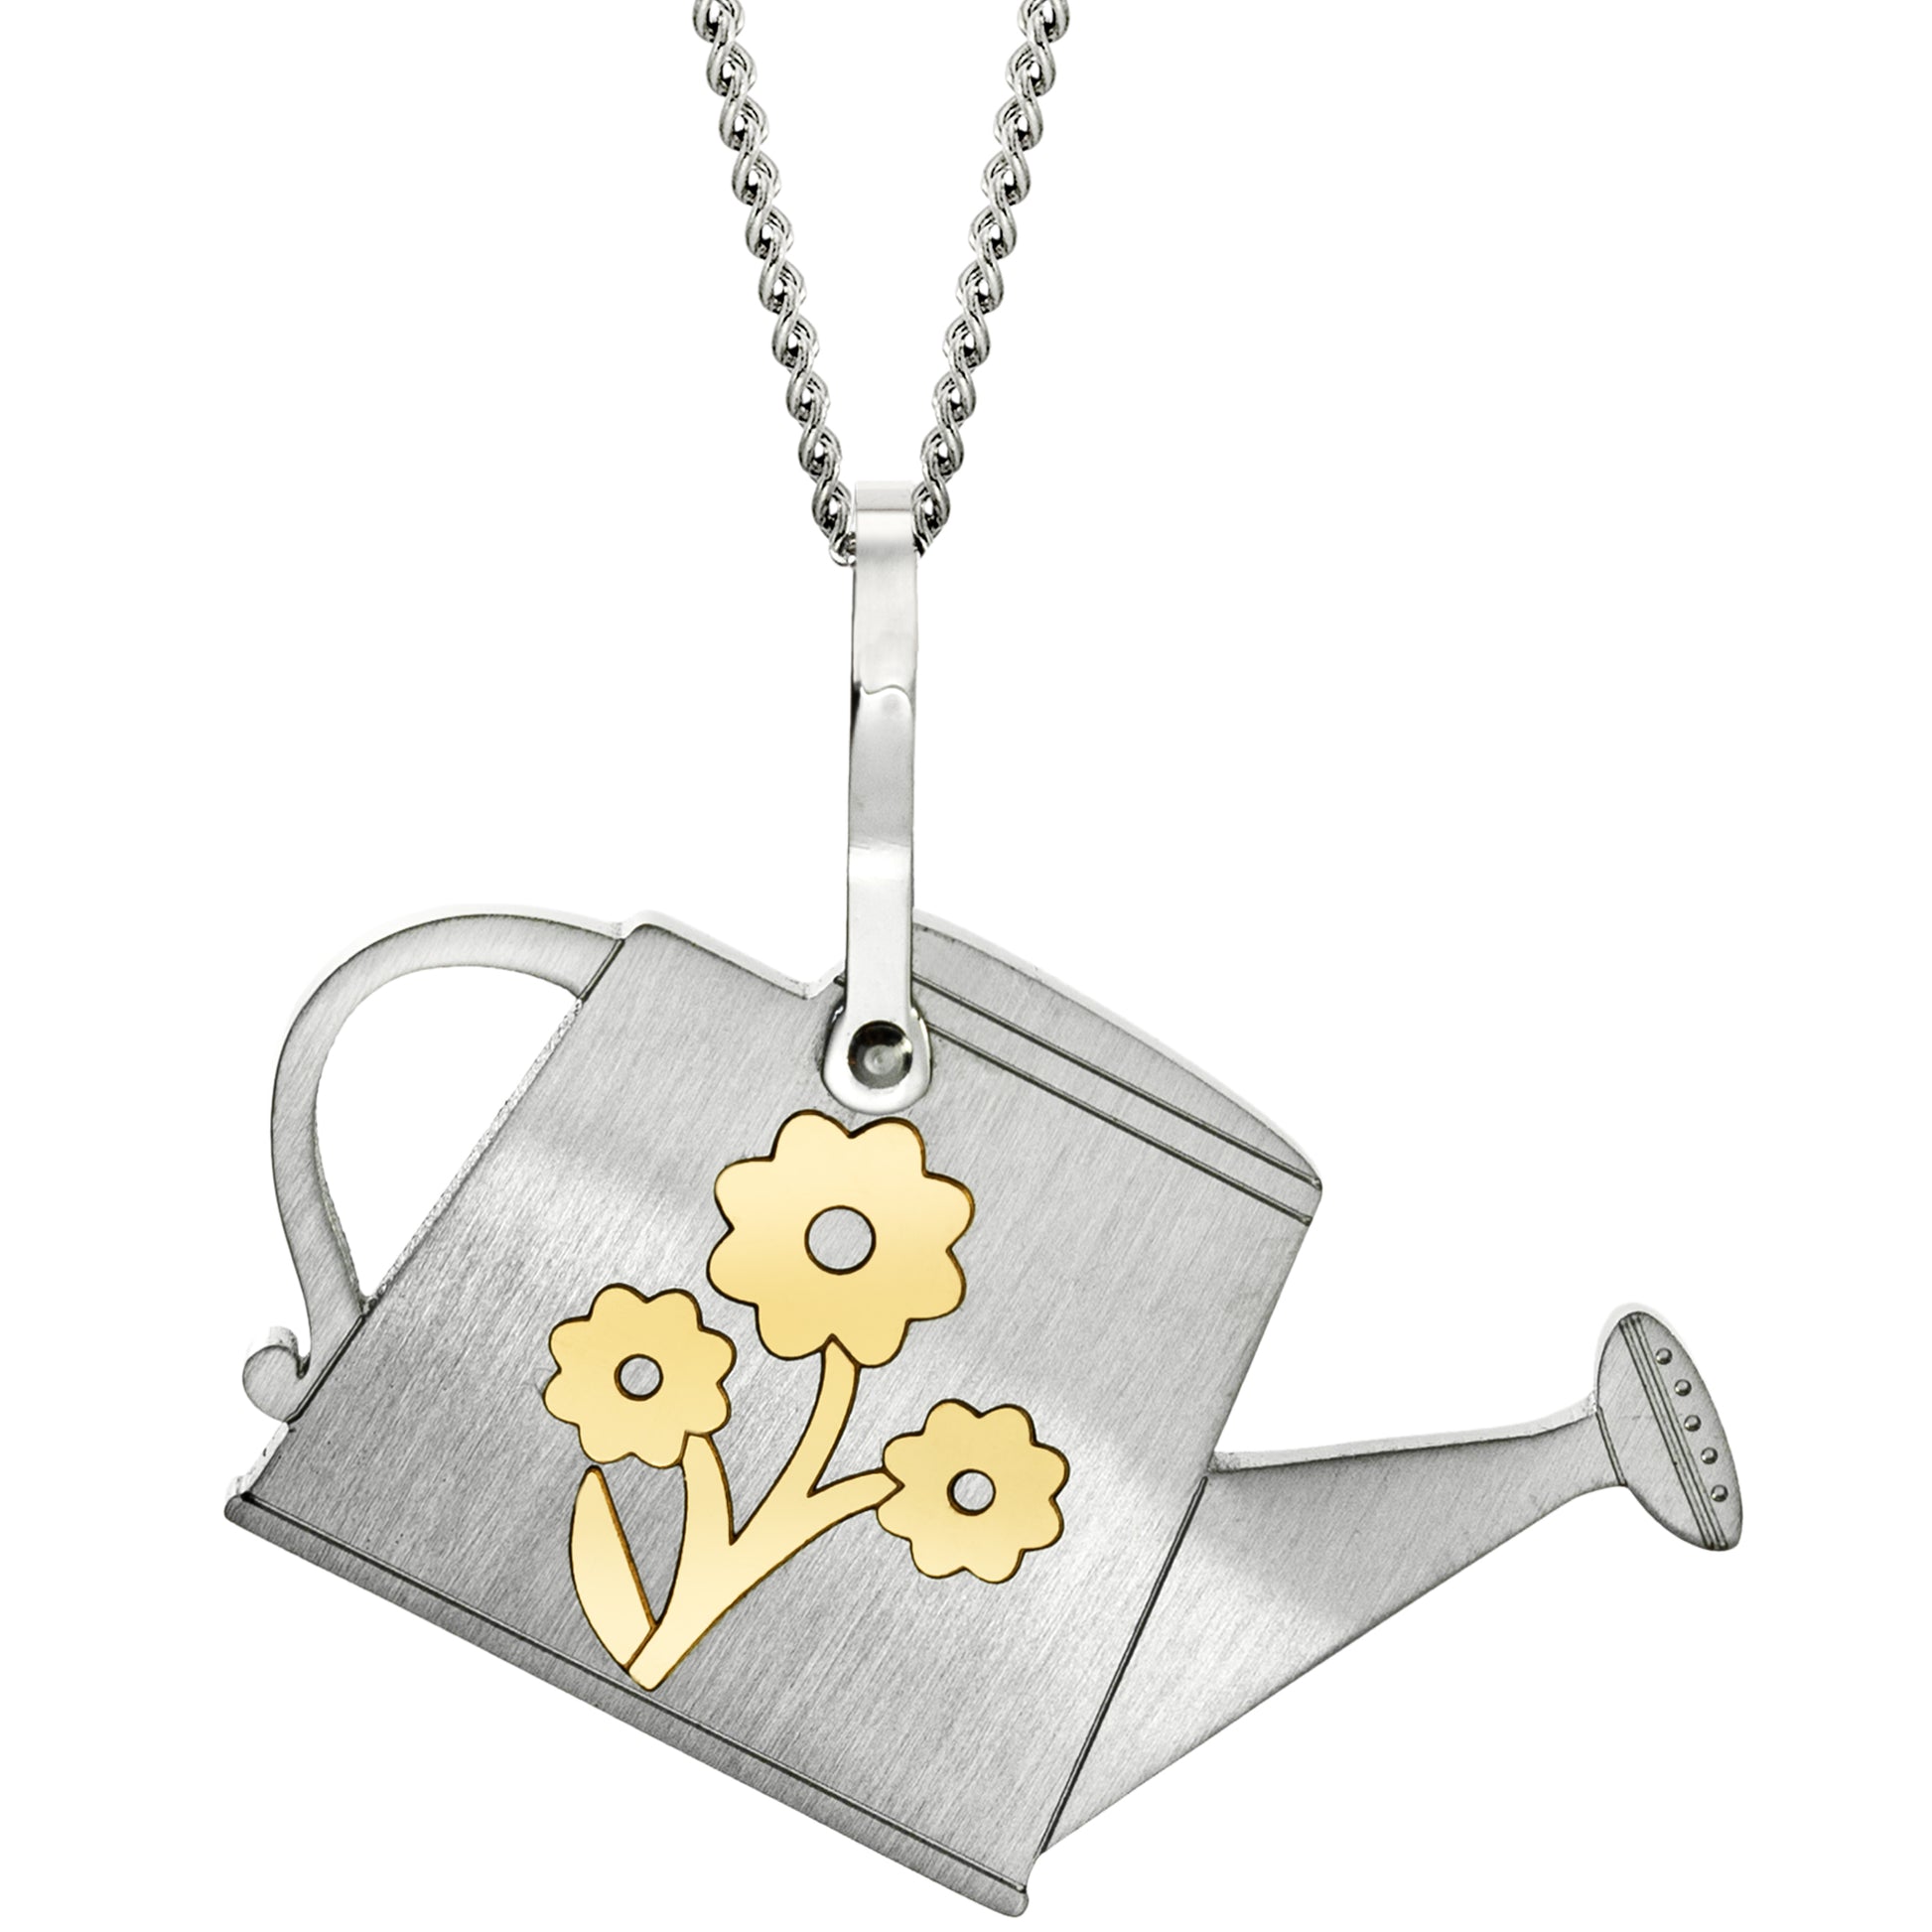 Stainless Steel Engraved Flower Watering Can Pendant Necklace - Gardening Jewelry Gift for Women